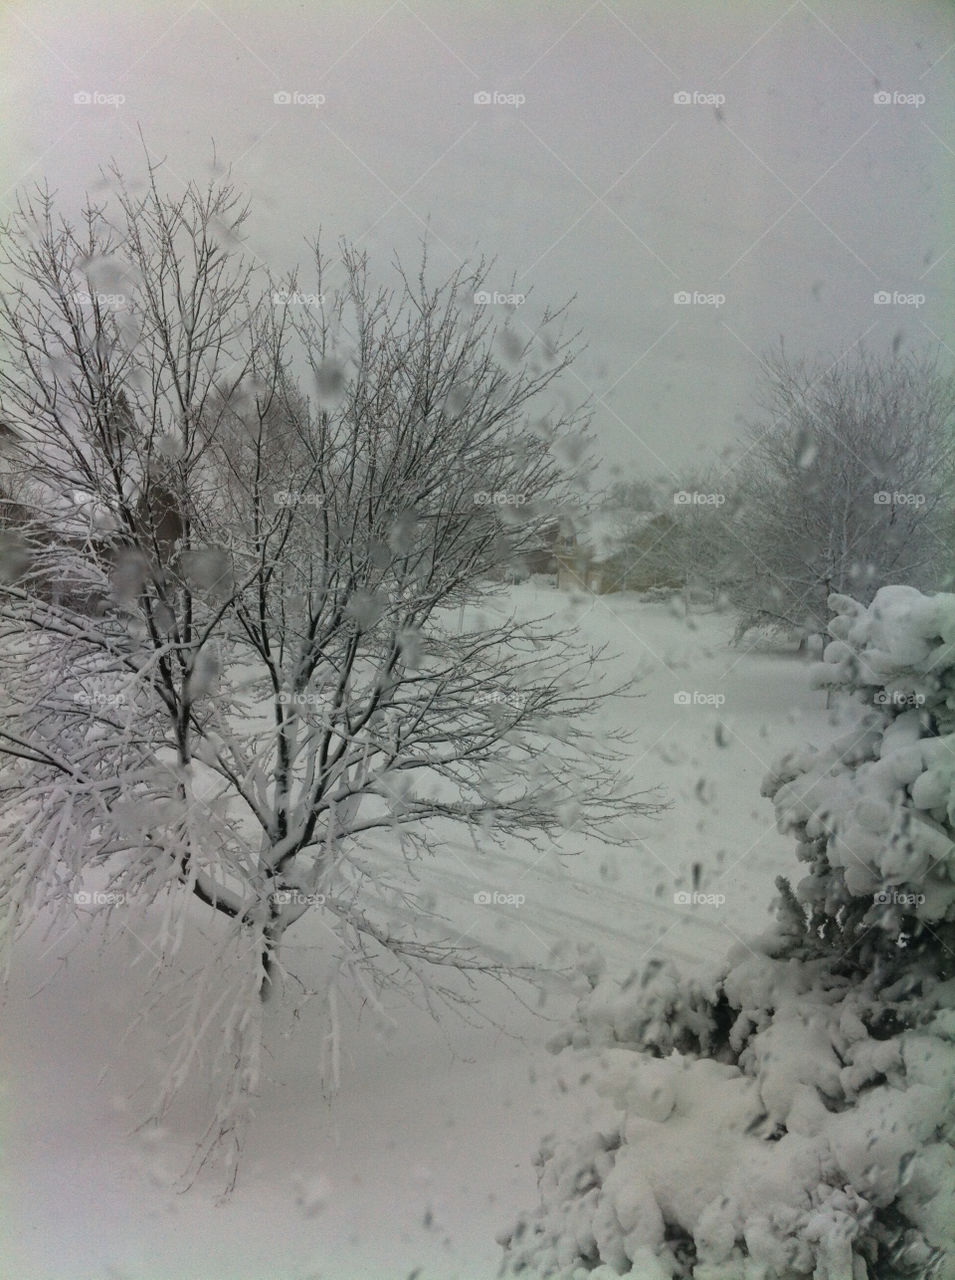 A snapshot of heavy snow outside the window.